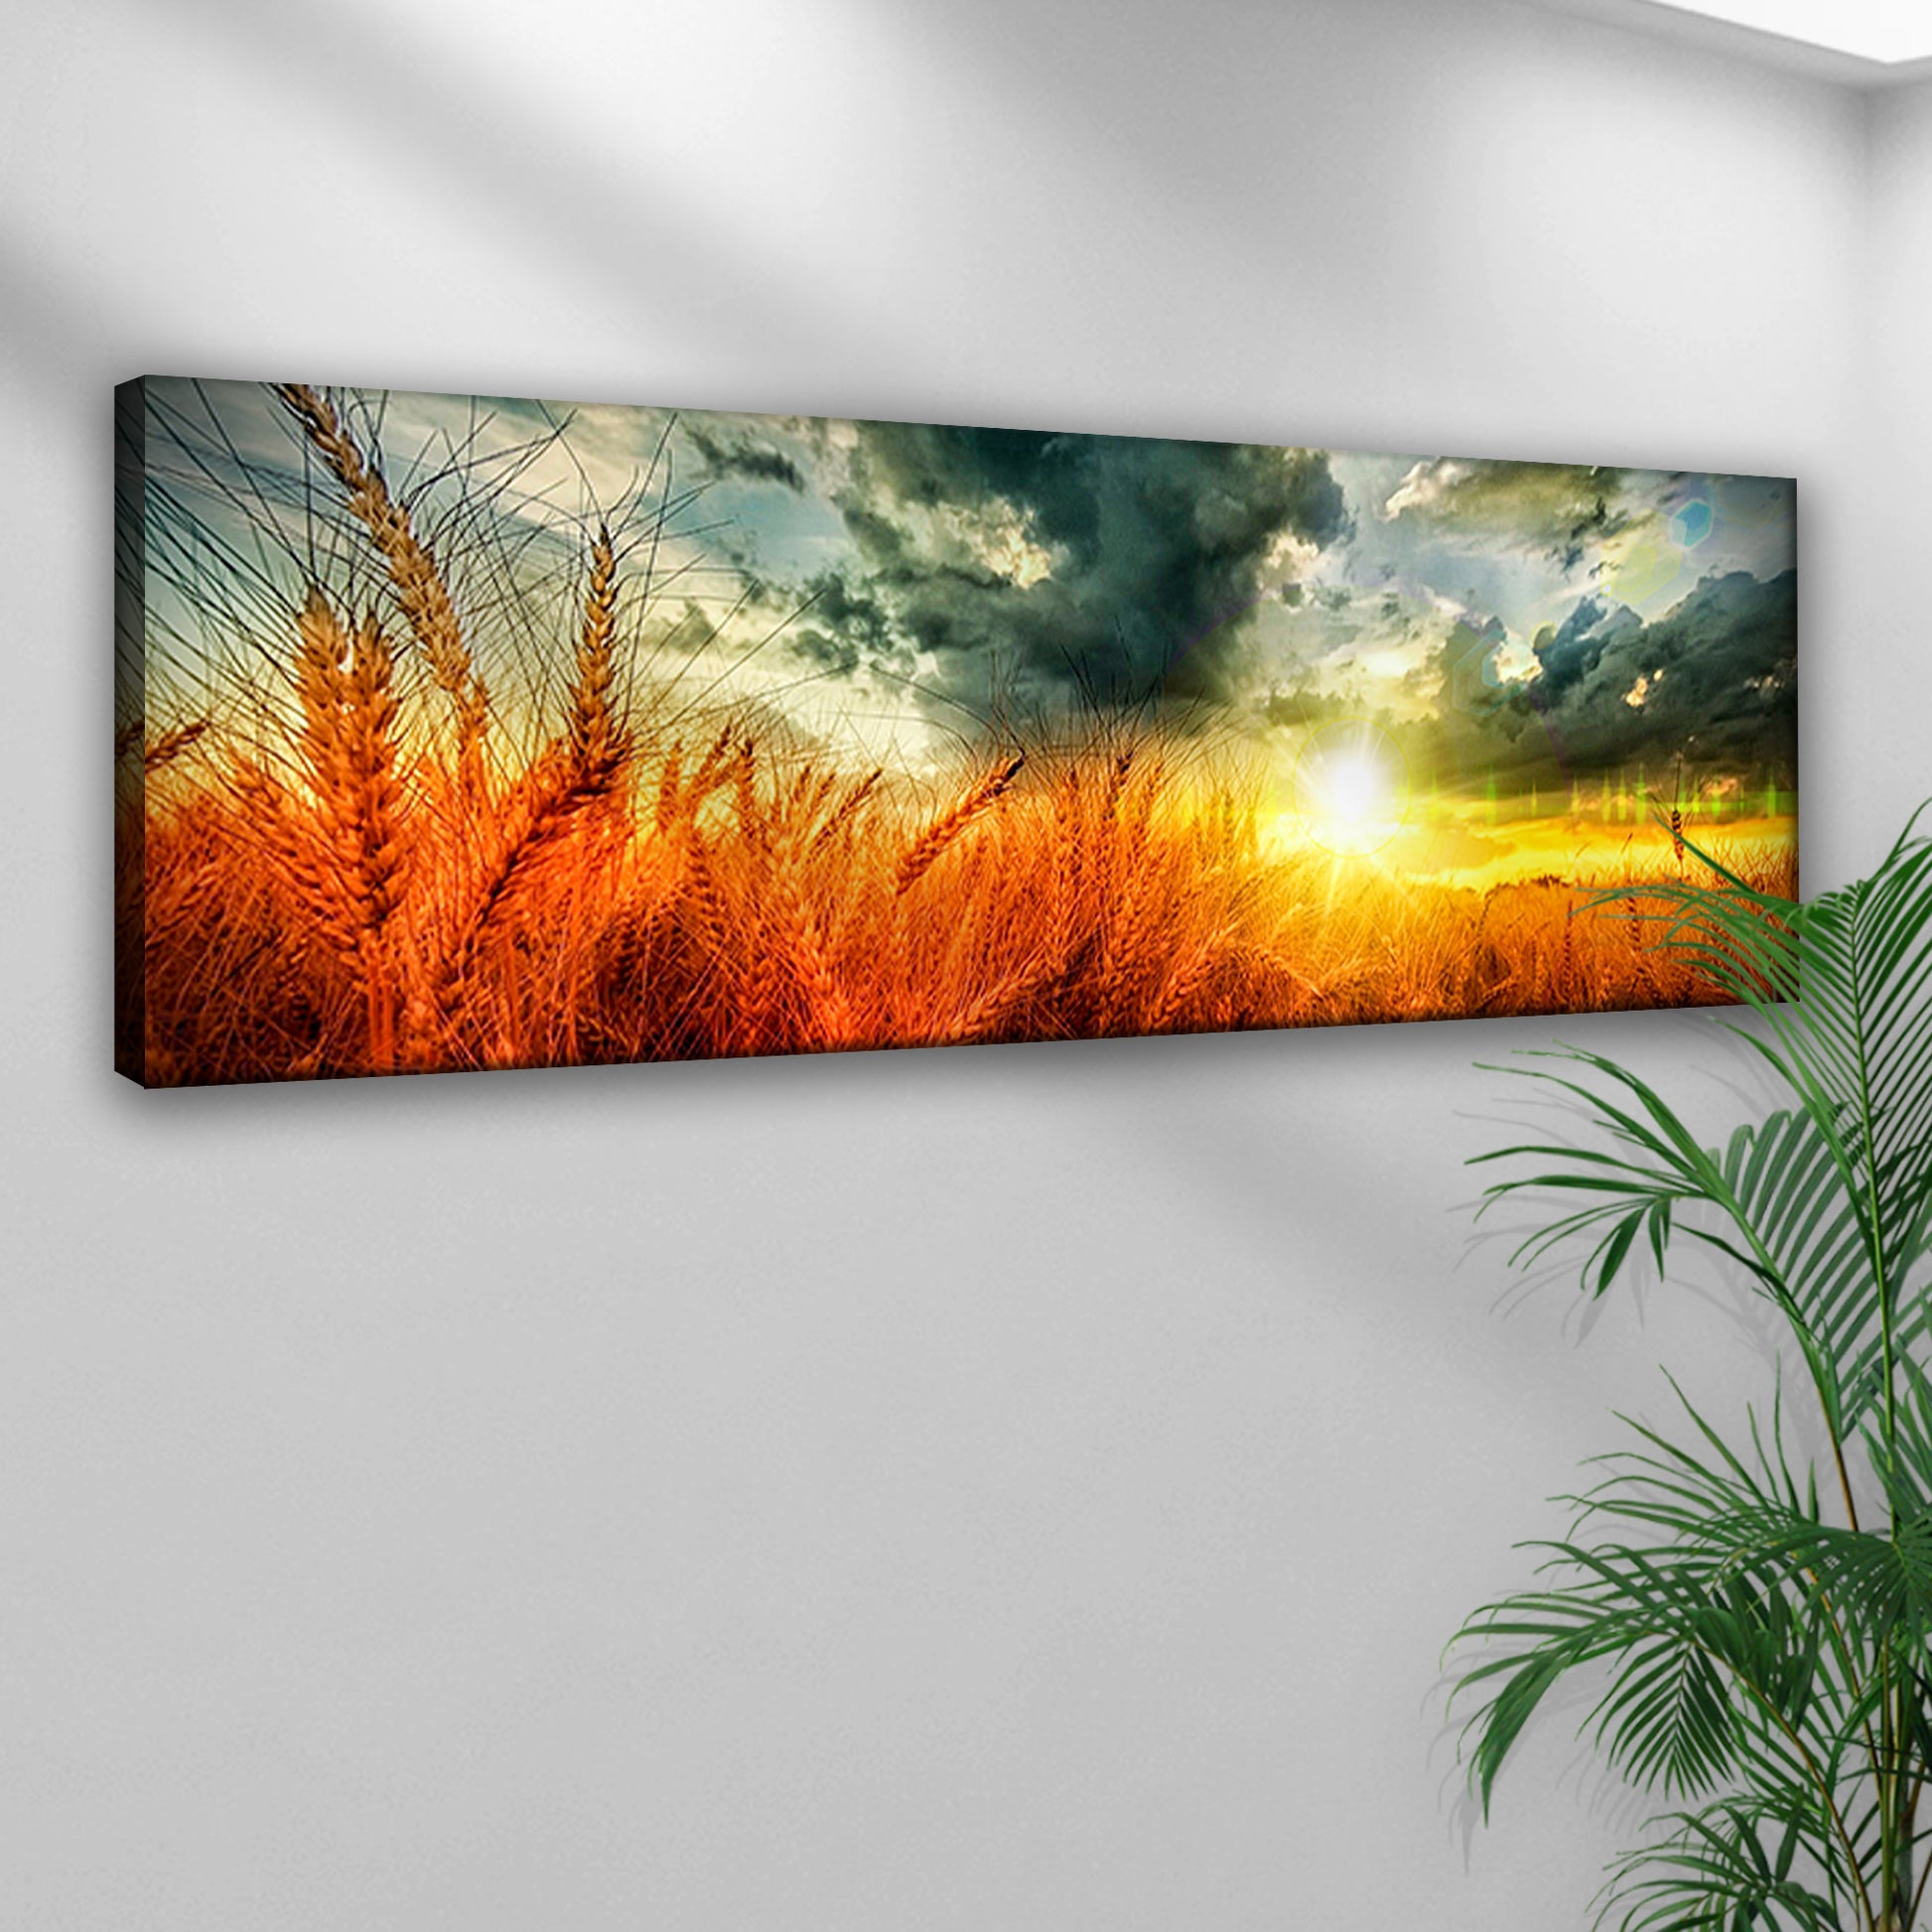 Dusk Falls On The Wheat Field Canvas Wall Art Style 1 - Image by Tailored Canvases